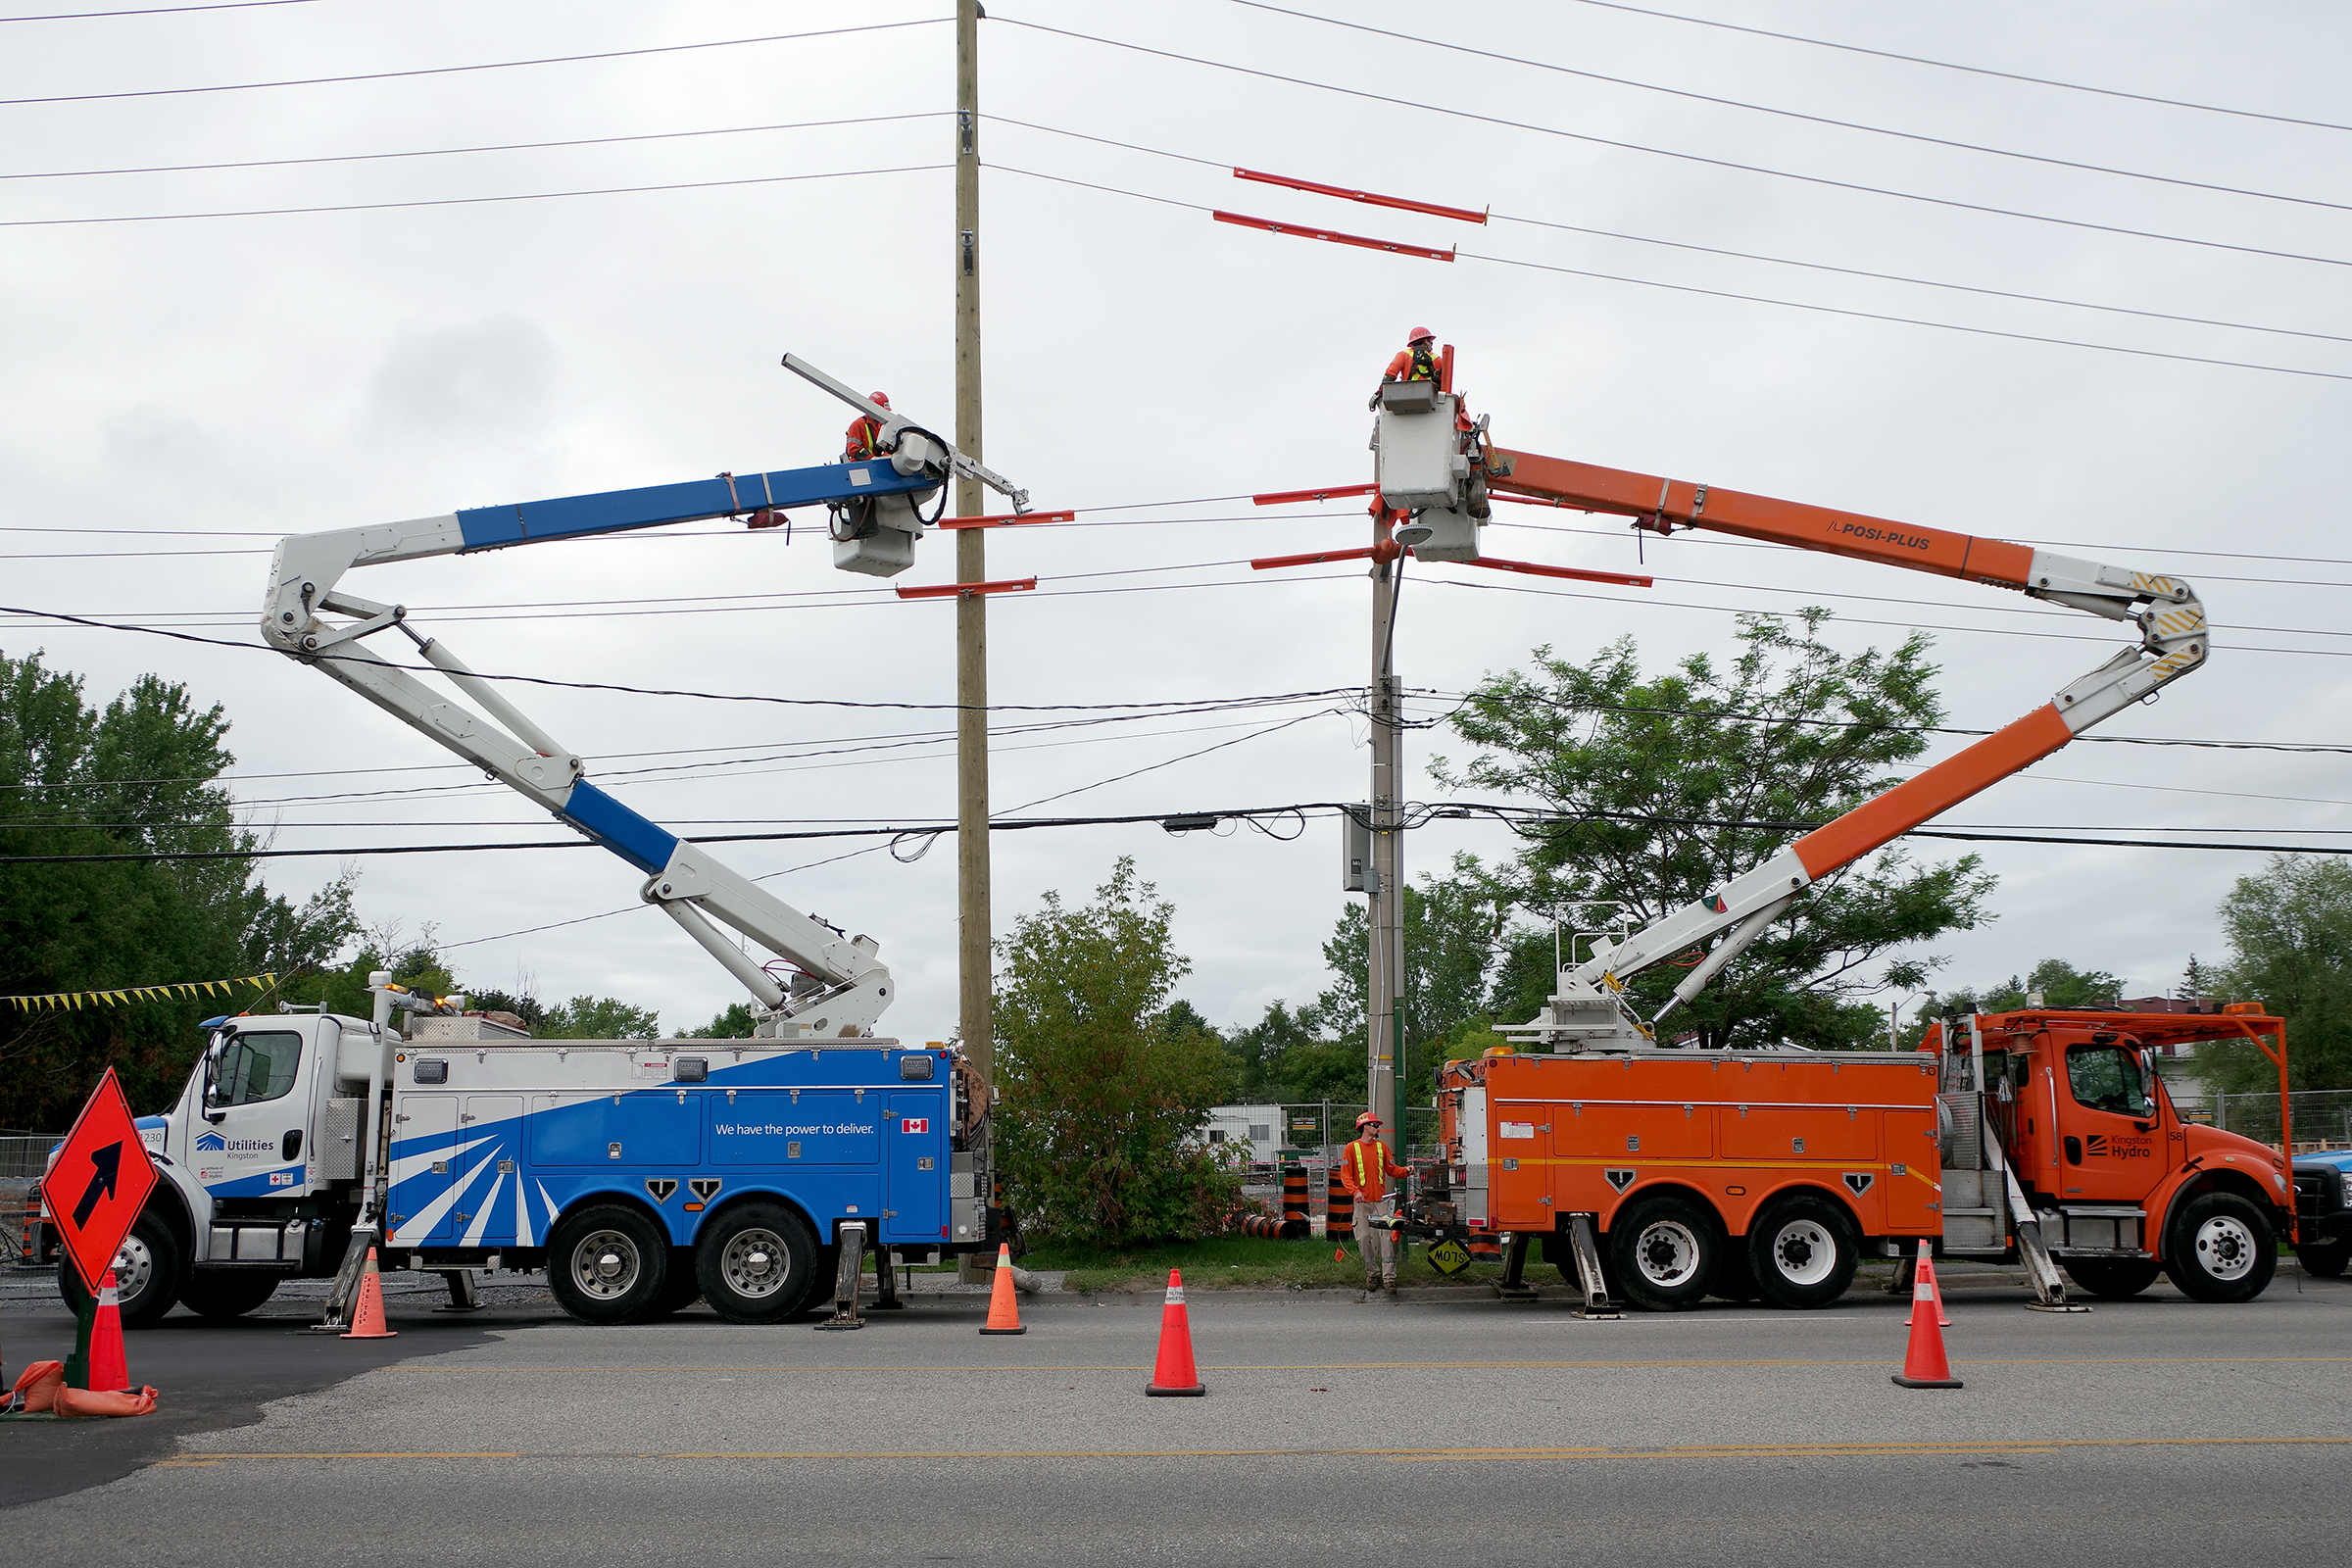 National Lineworker Appreciation Day is July 10